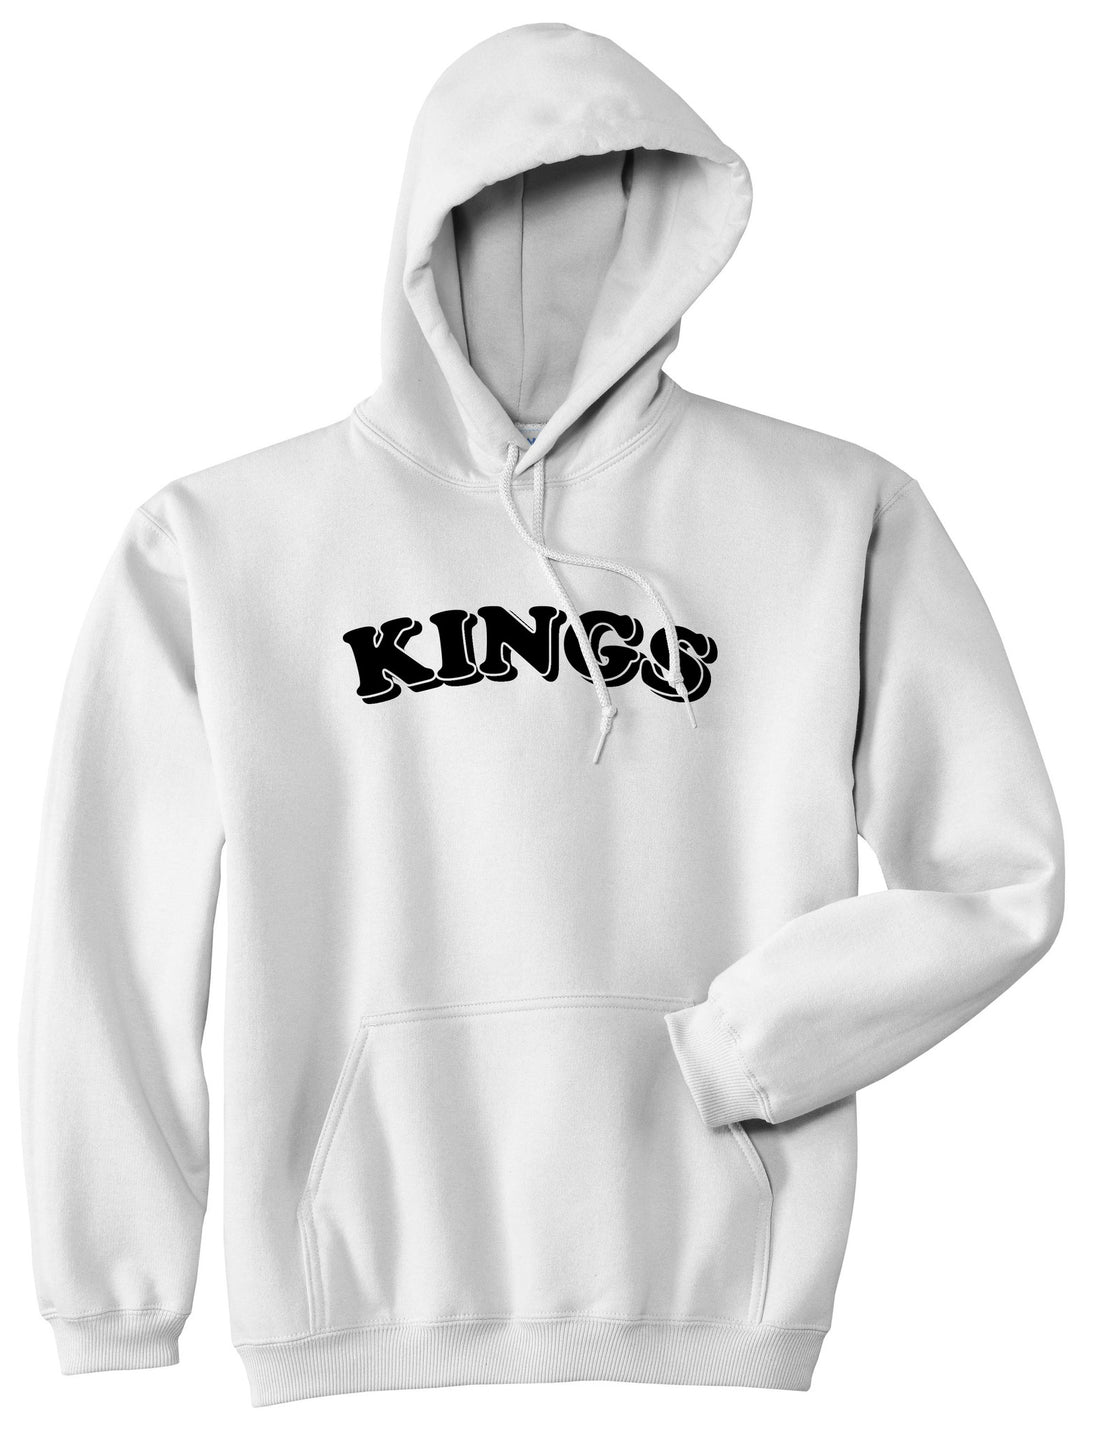 KINGS Bubble Letters Pullover Hoodie in White